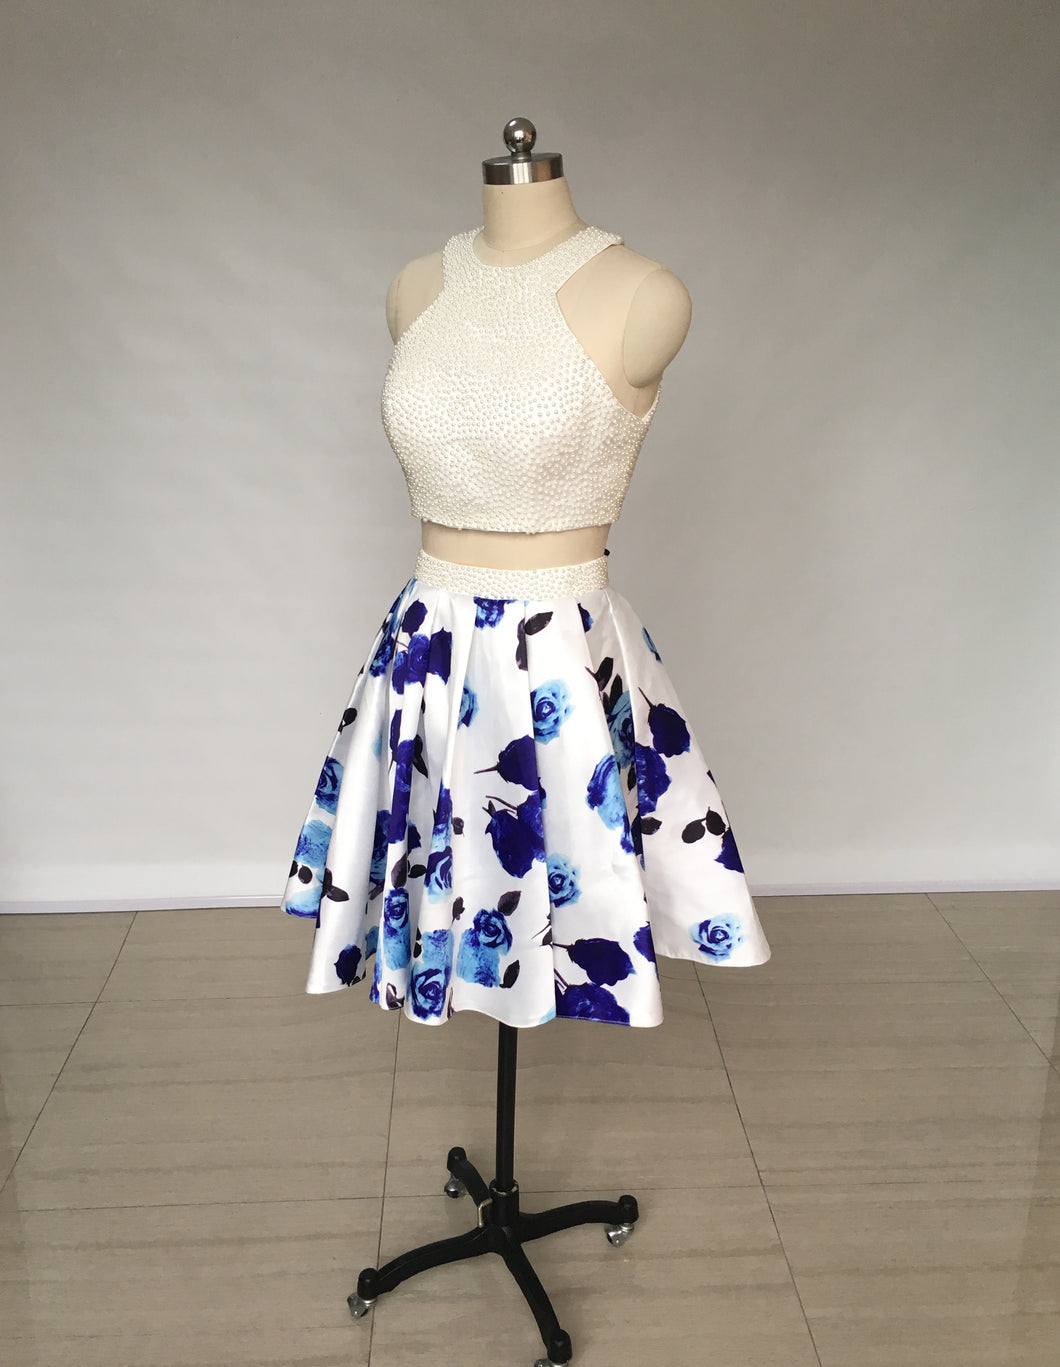 Two Piece Ivory Floral Print Satin Short Homecoming Dress